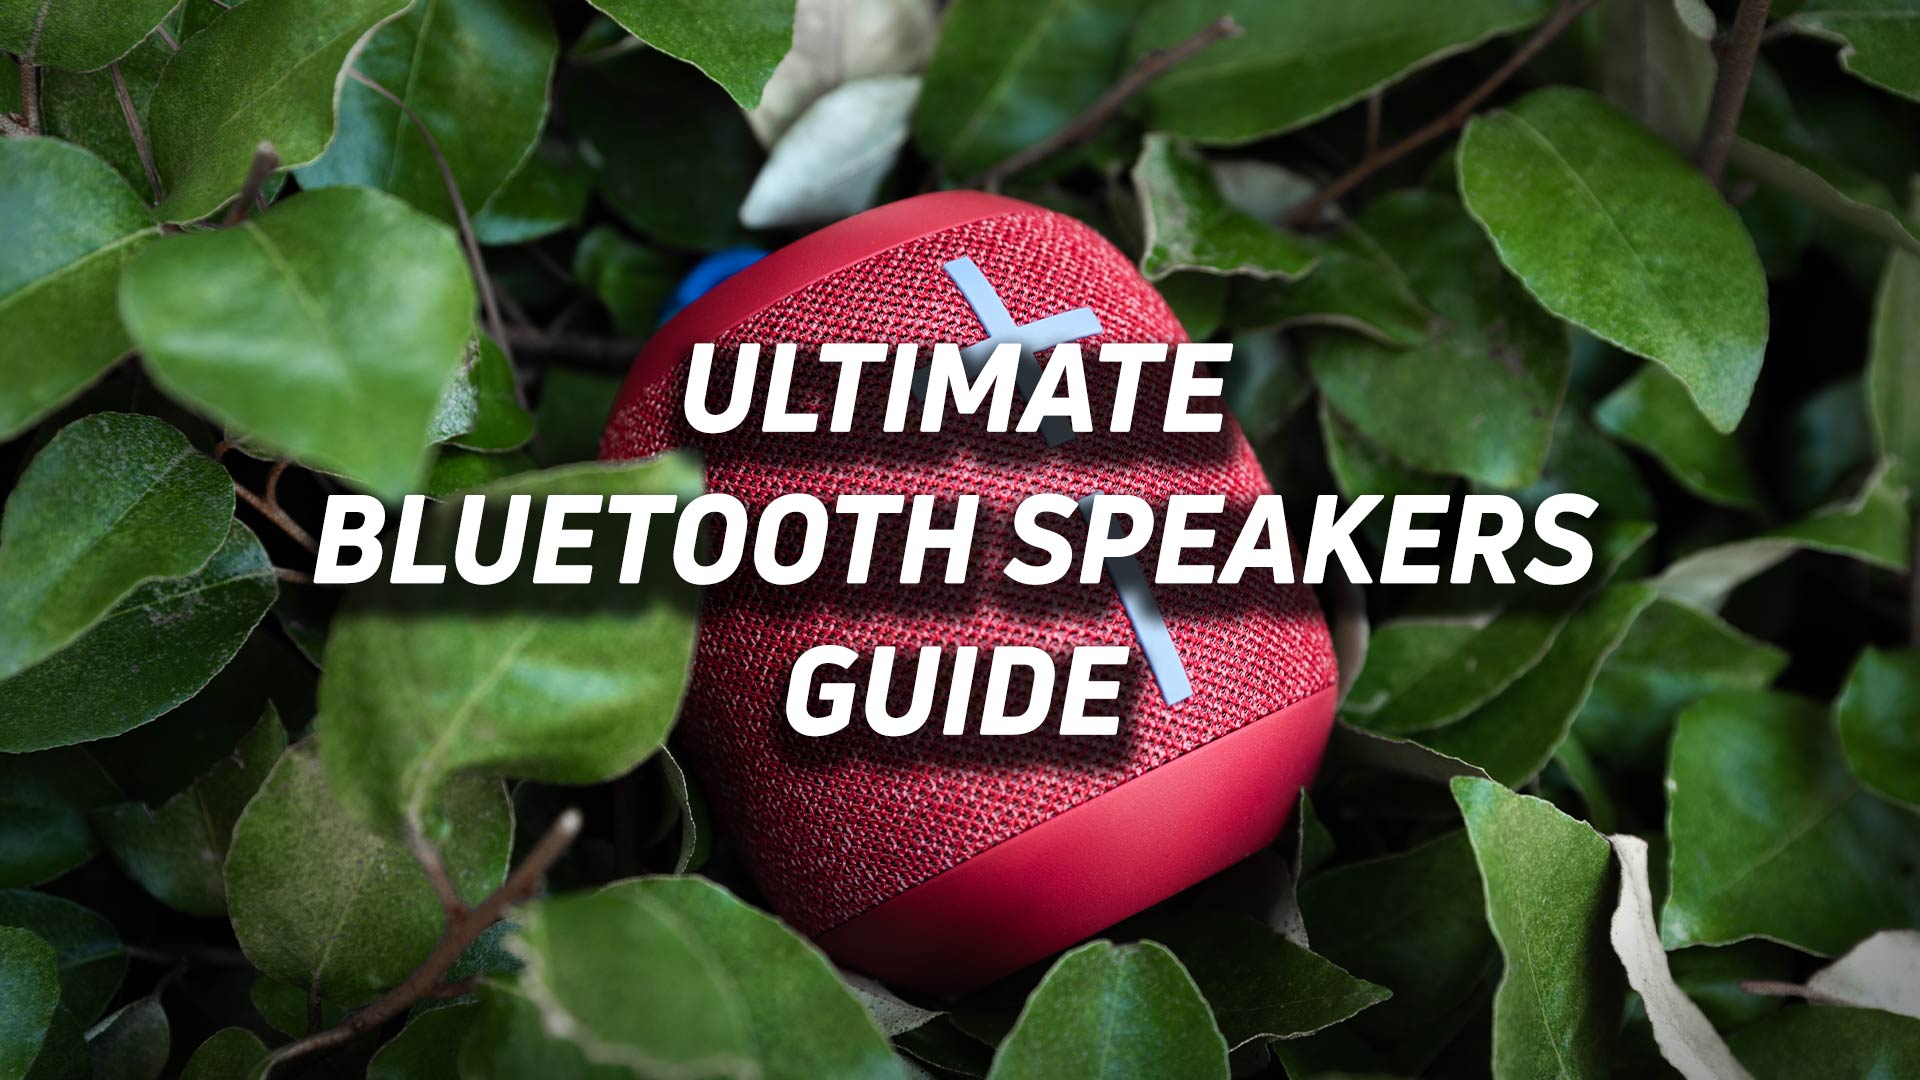 The UE WONDERBOOM 2 Bluetooth speaker in red against a green leafy background with the phrase "Ultimate Bluetooth speakers guide" overlaid on top of it.